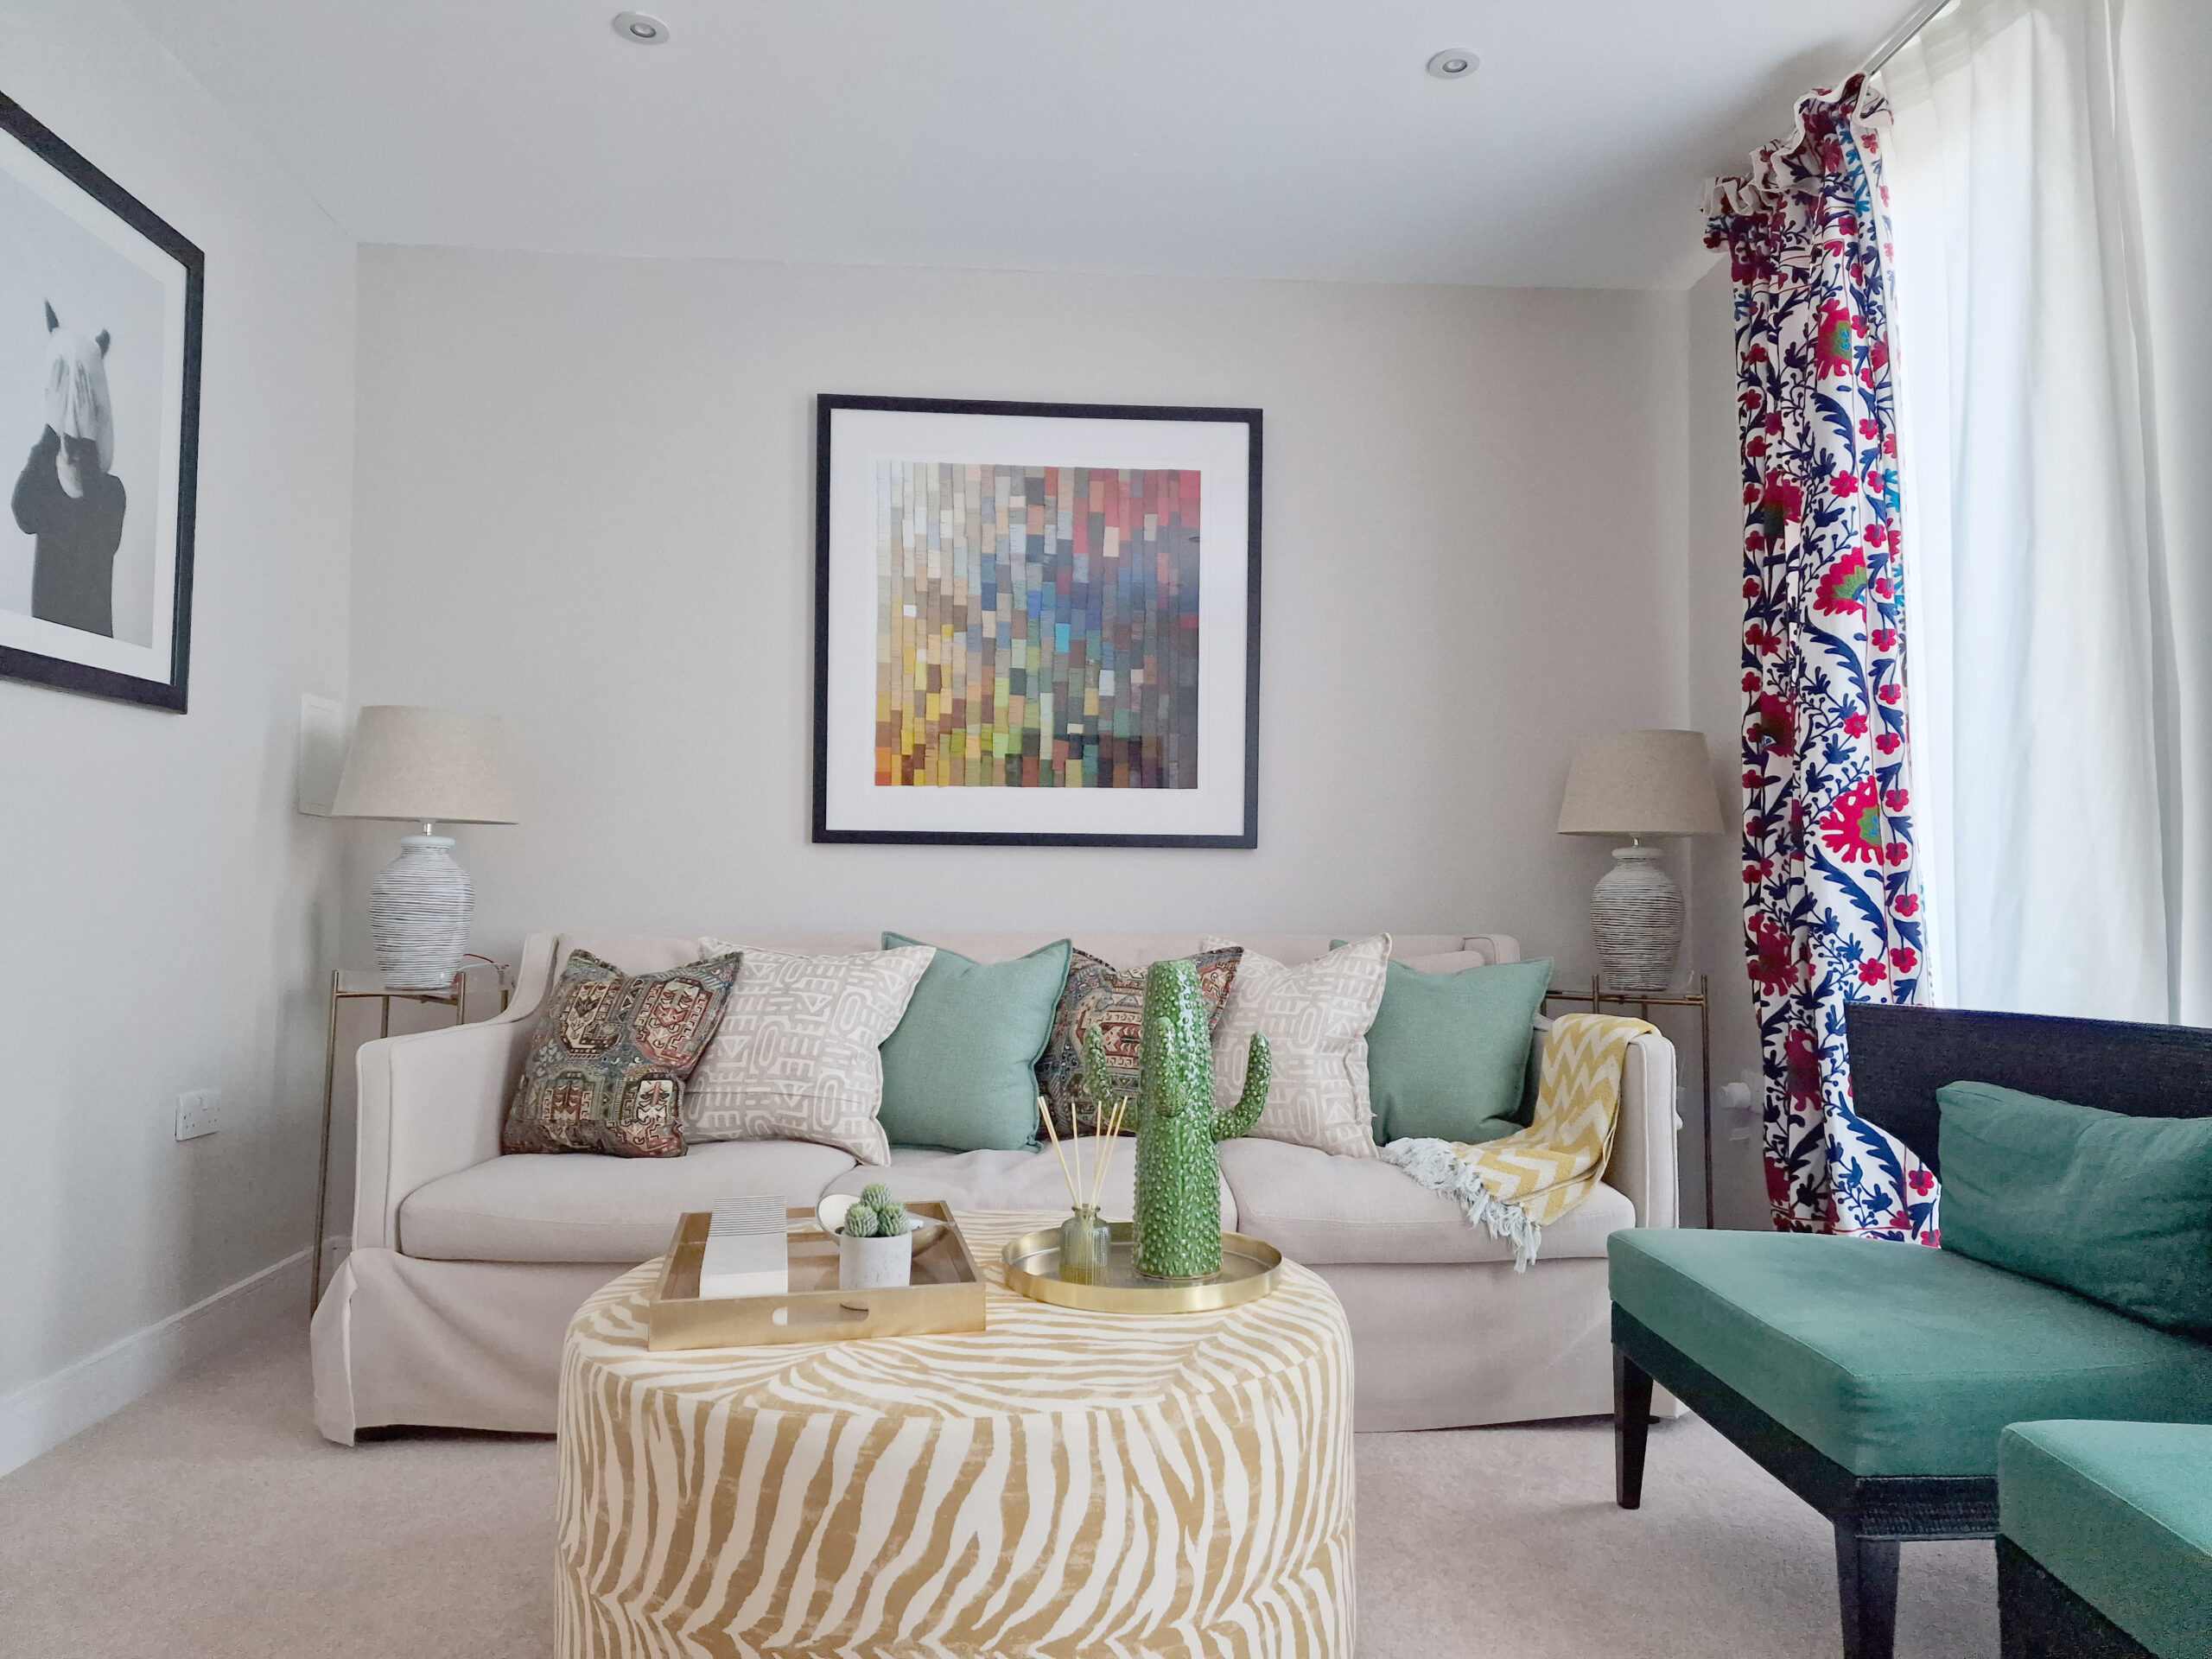 PROJECT - Eclectic Clapham Townhouse Speaking of Interiors